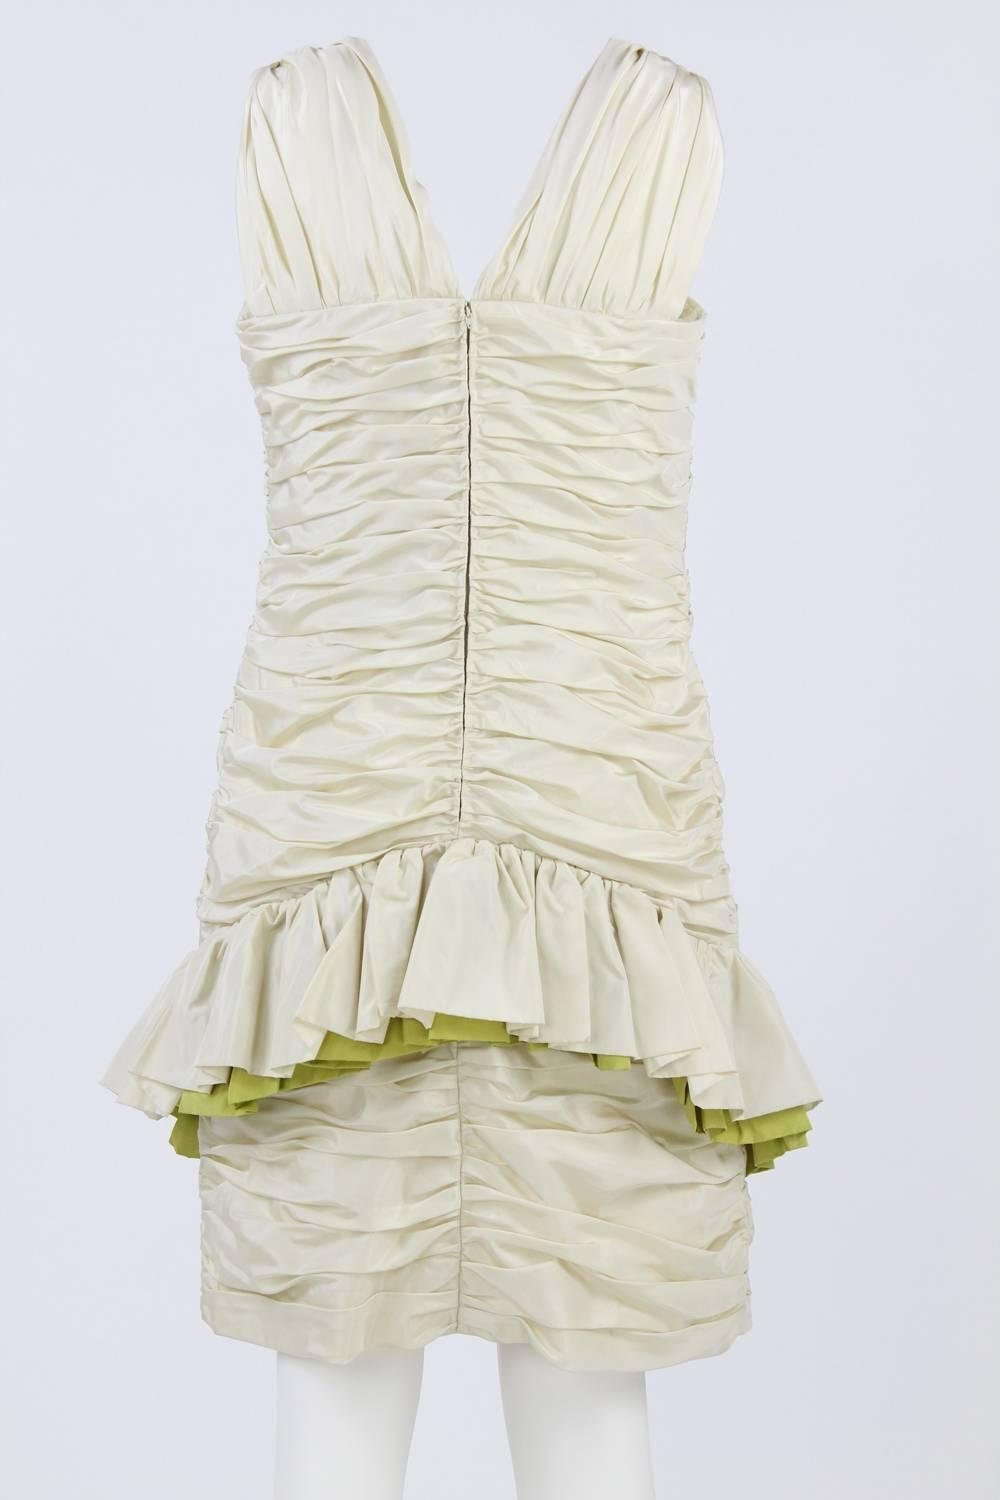 Lovely Nina Ricci Off-White dress in a draped silk fabric. The dress is fully lined.
Size 42 FR.

Measurements:
length: 97 cm
bust: 44 cm